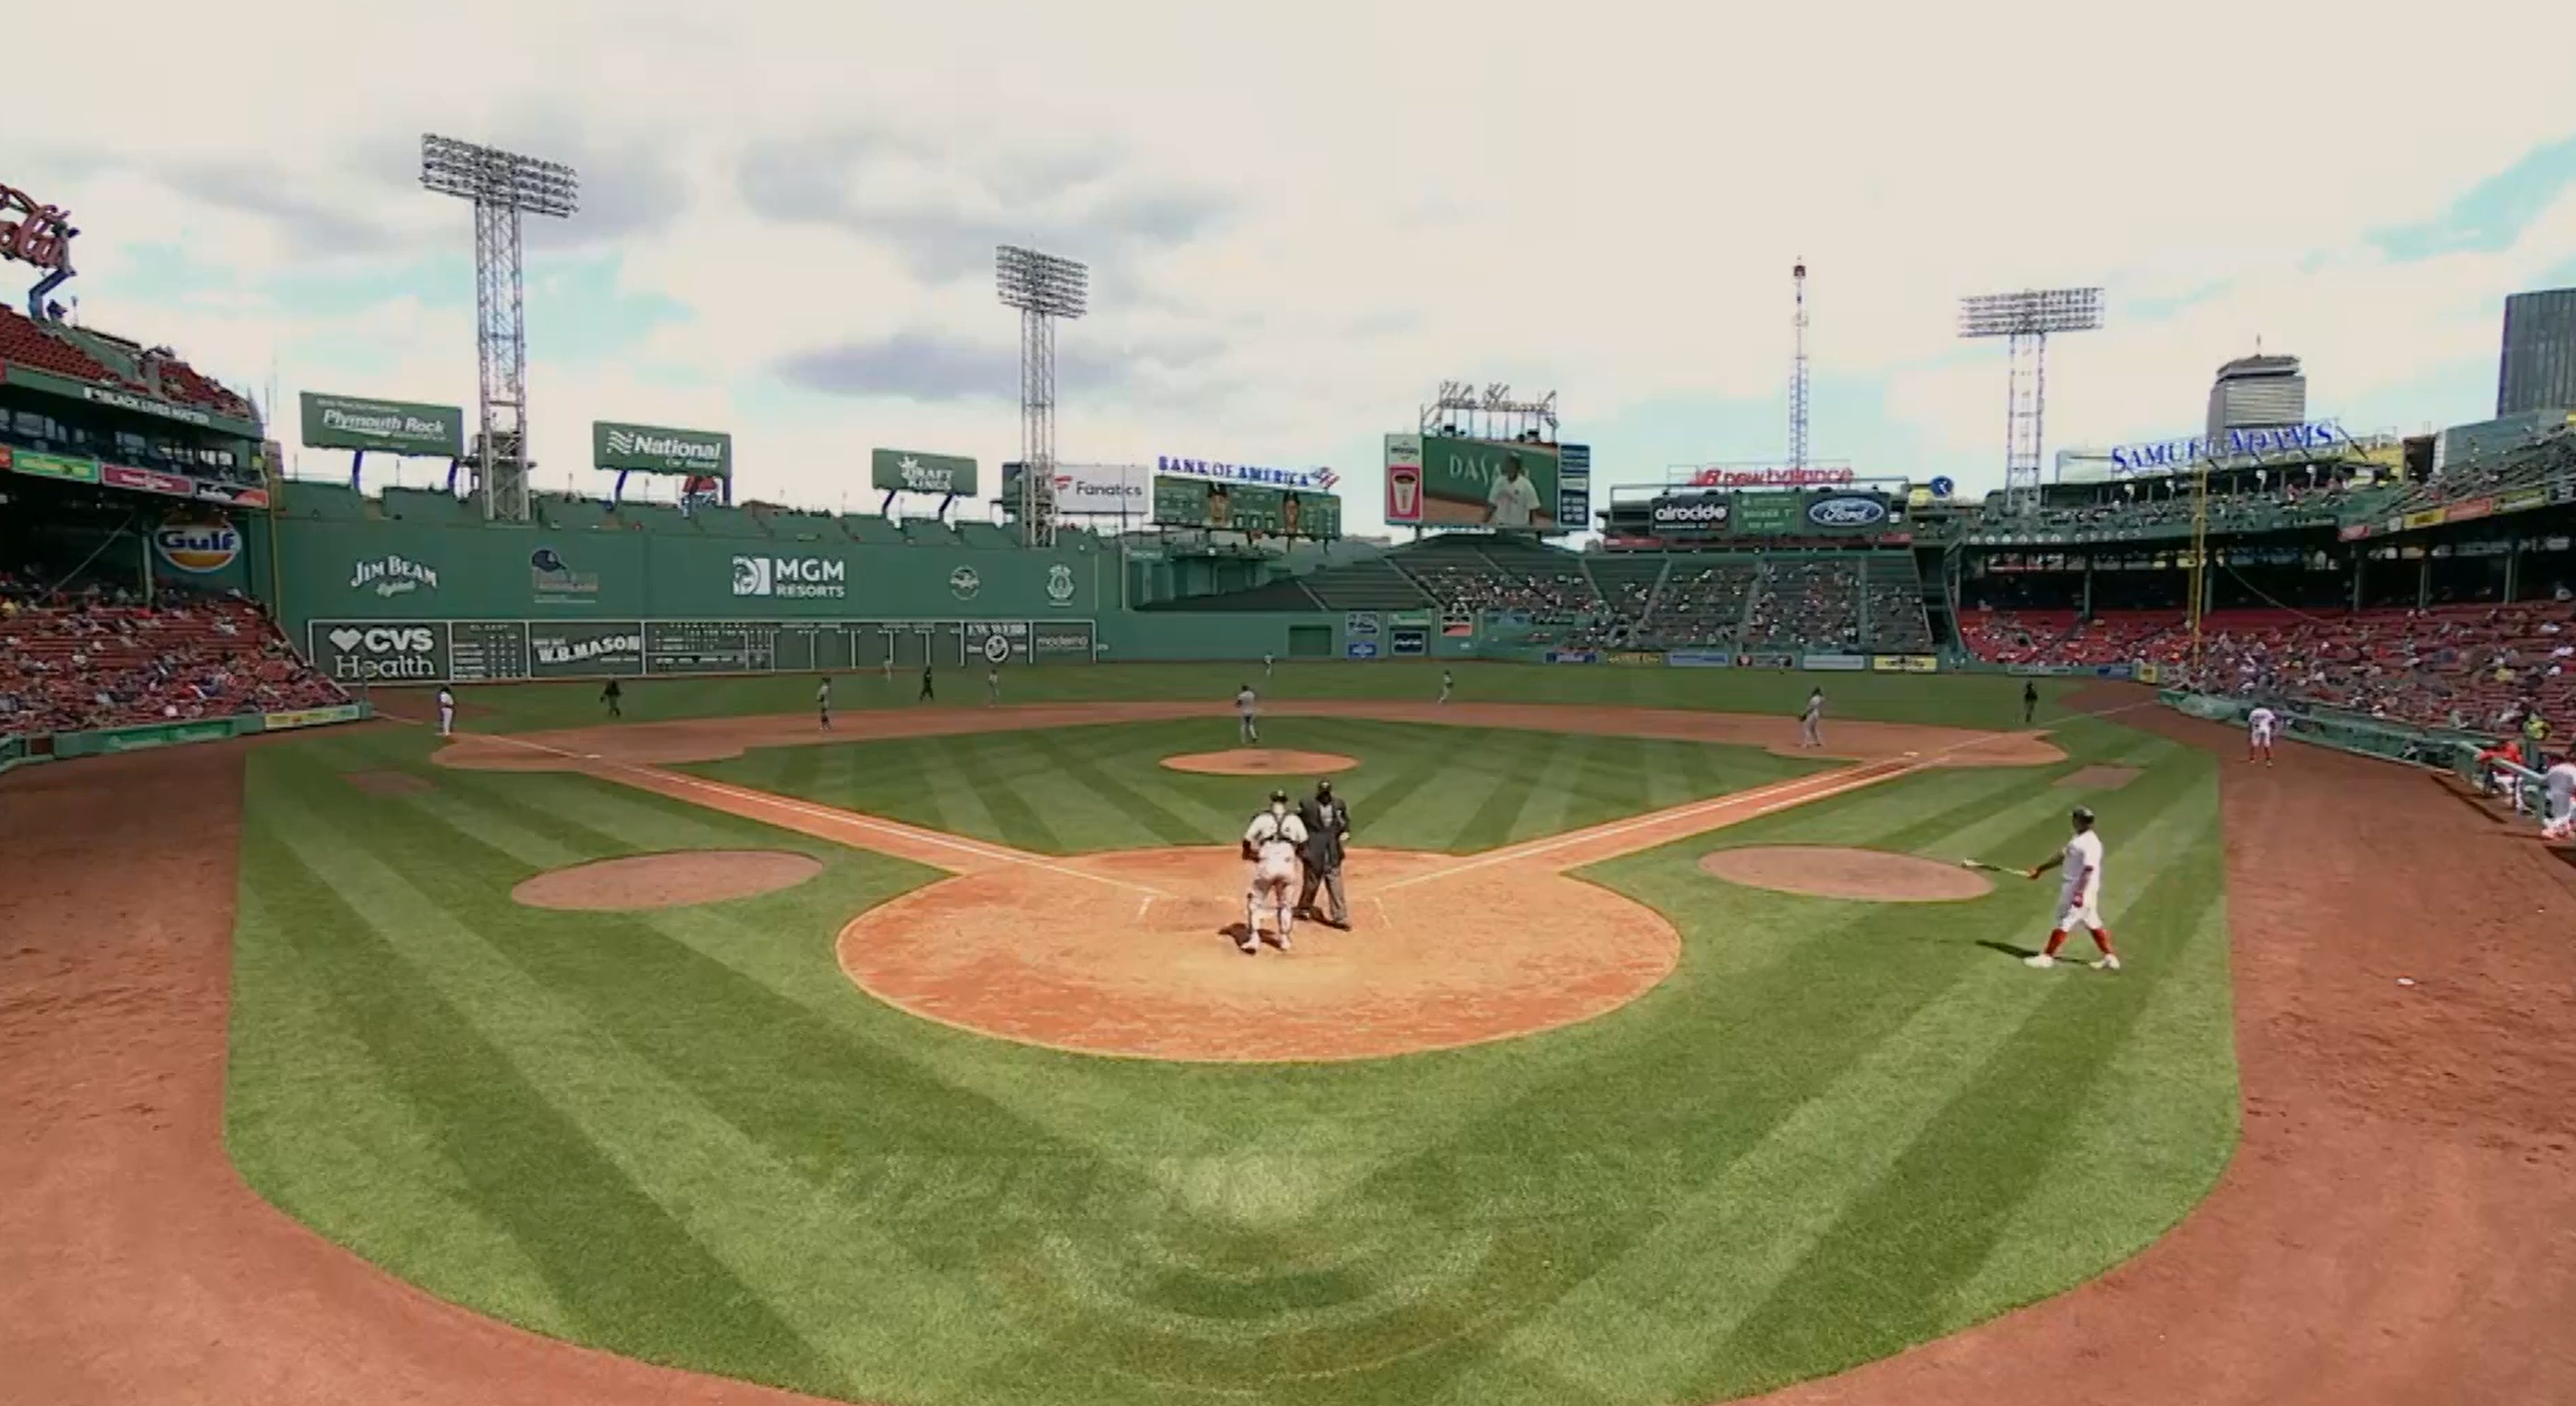 Should the Red Sox Consider Replacing Iconic Fenway Park?? 